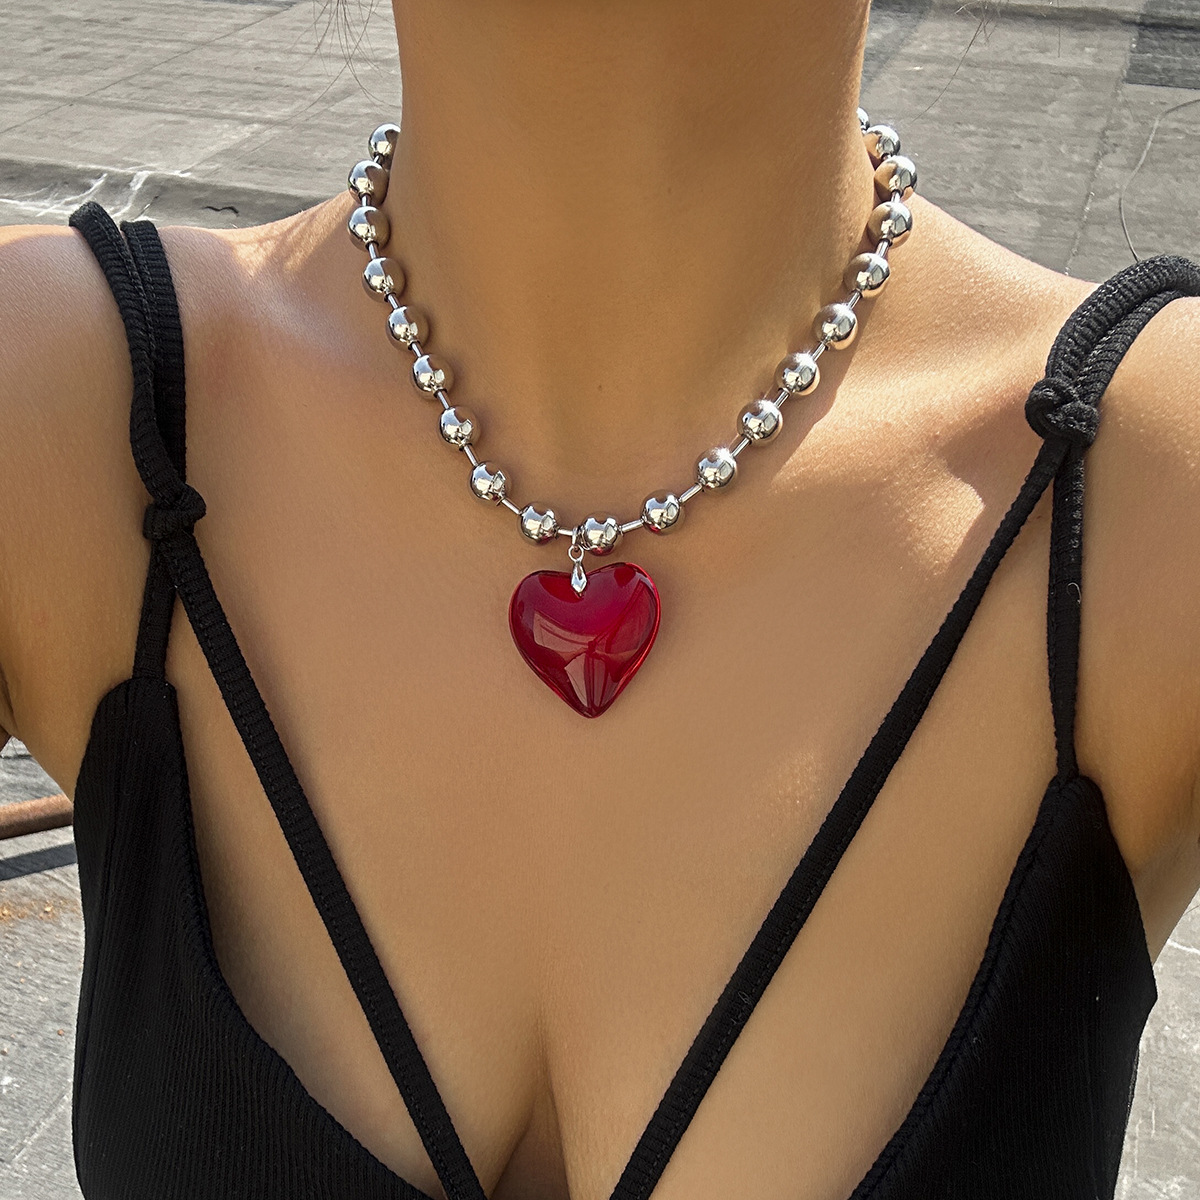 Trinity Trend: The Vivienne Westwood Necklace – The University Times